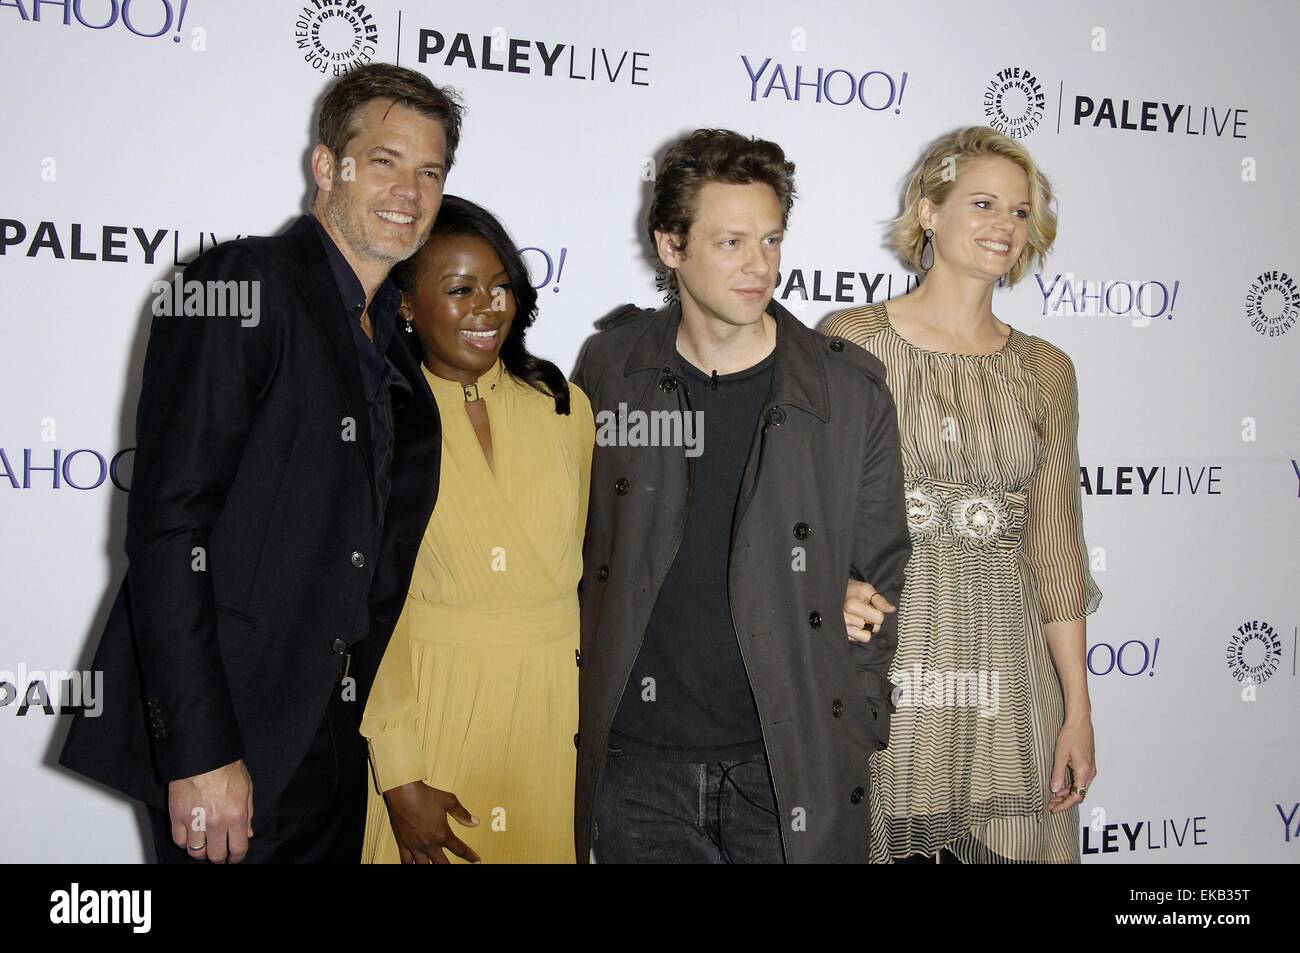 Los Angeles, CA, USA. 8th Apr, 2015. Timothy Olyphant, Erica Tazel, Jacob Pitts, Joelle Carter at arrivals for The Paley Center For Media Presents An Evening with FX'S JUSTIFIED, The Paley Center for Media, Los Angeles, CA April 8, 2015. Credit:  Michael Germana/Everett Collection/Alamy Live News Stock Photo